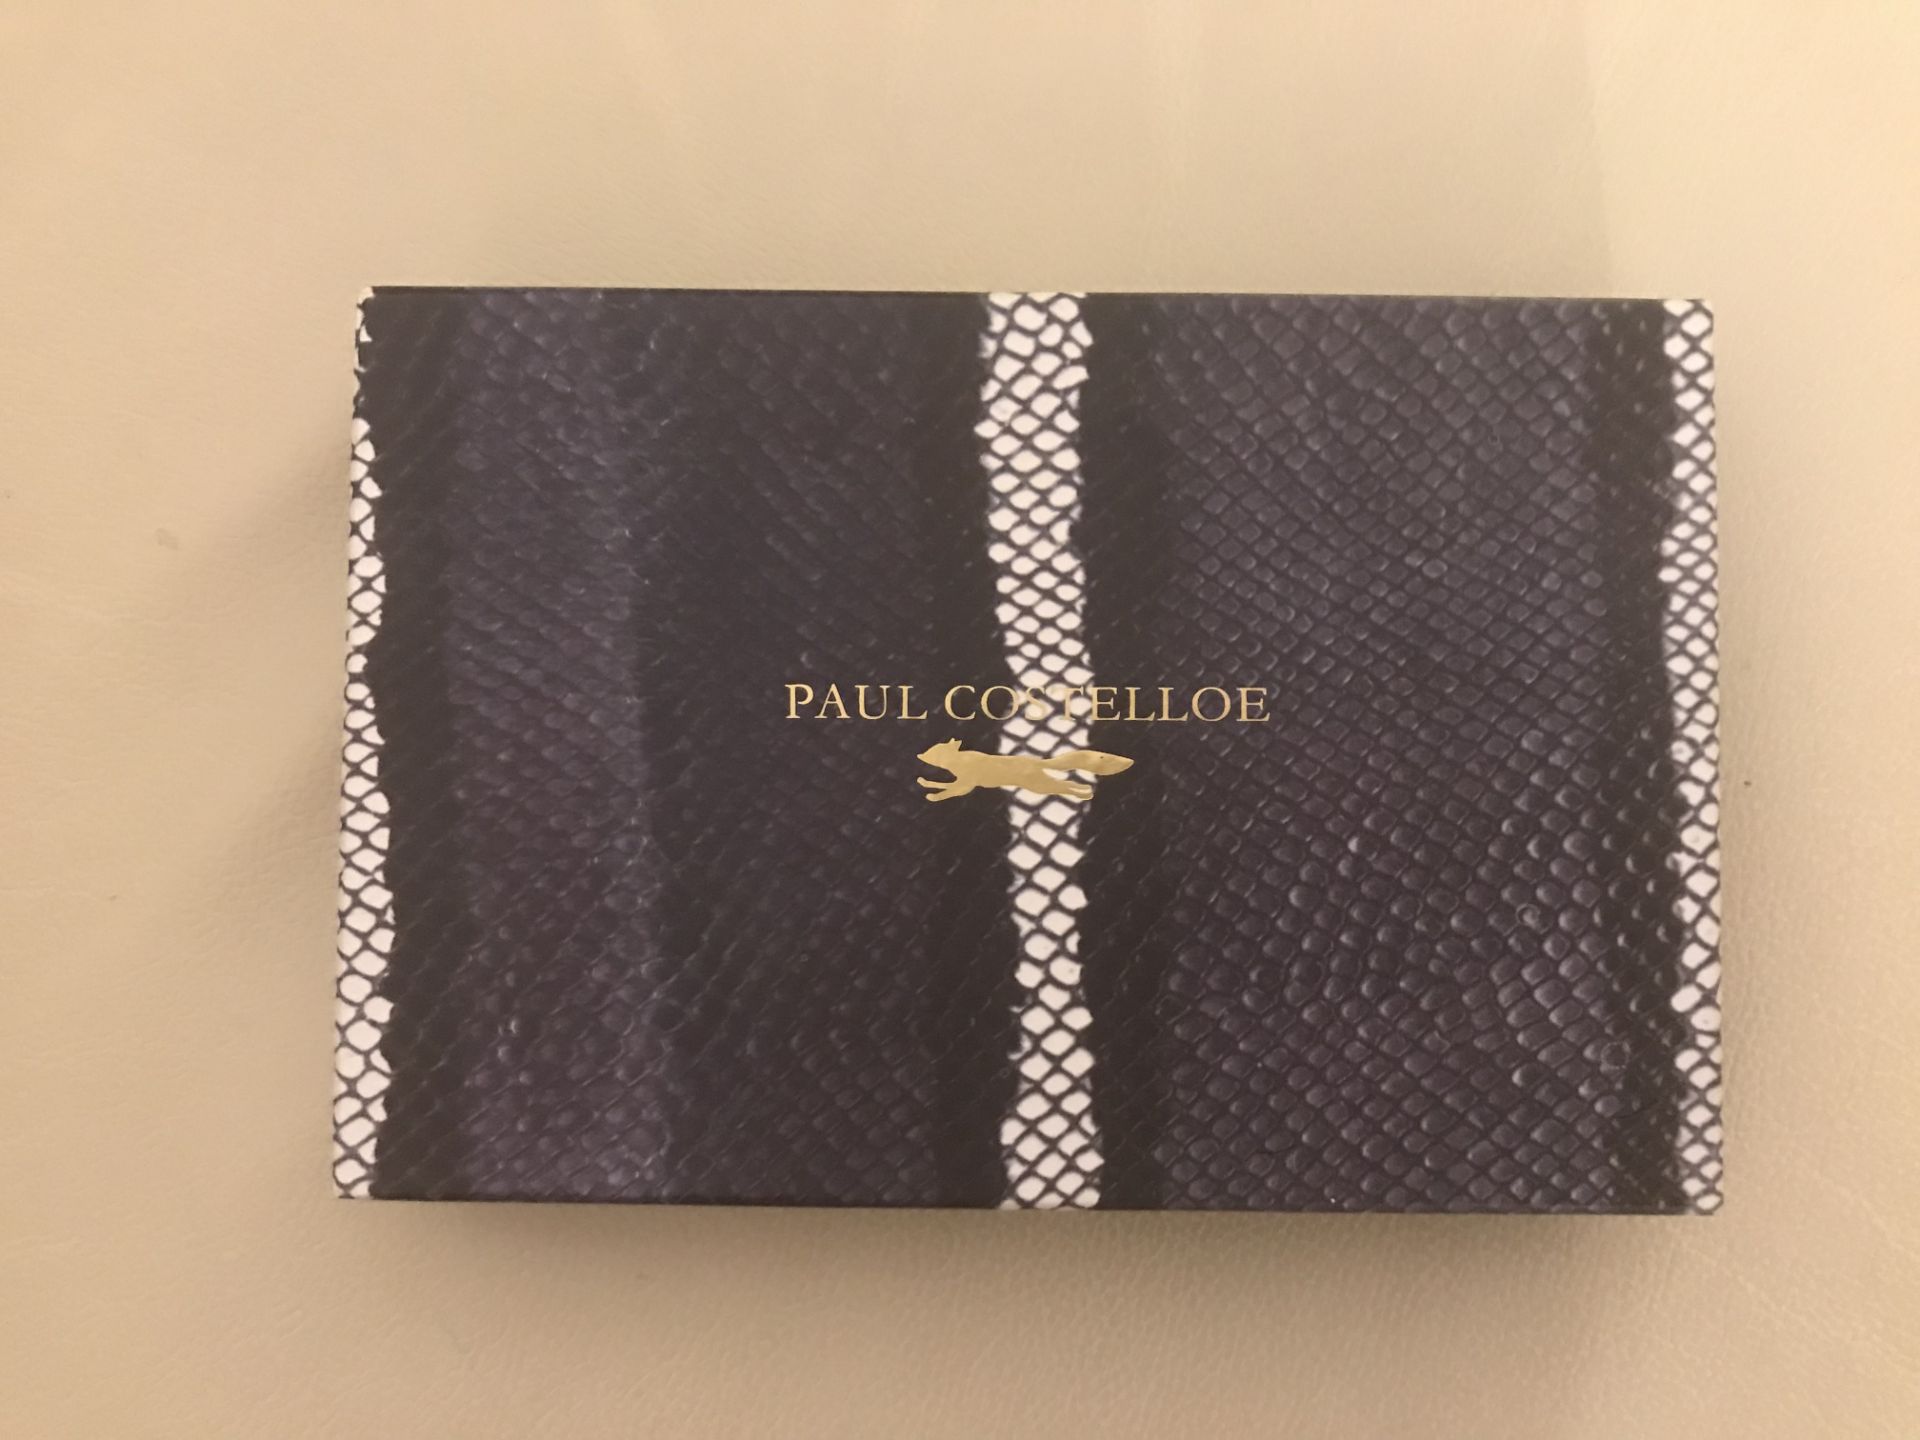 Paul Costelloe Leather Snake Print zip around purse wallet Brand New - Image 2 of 7